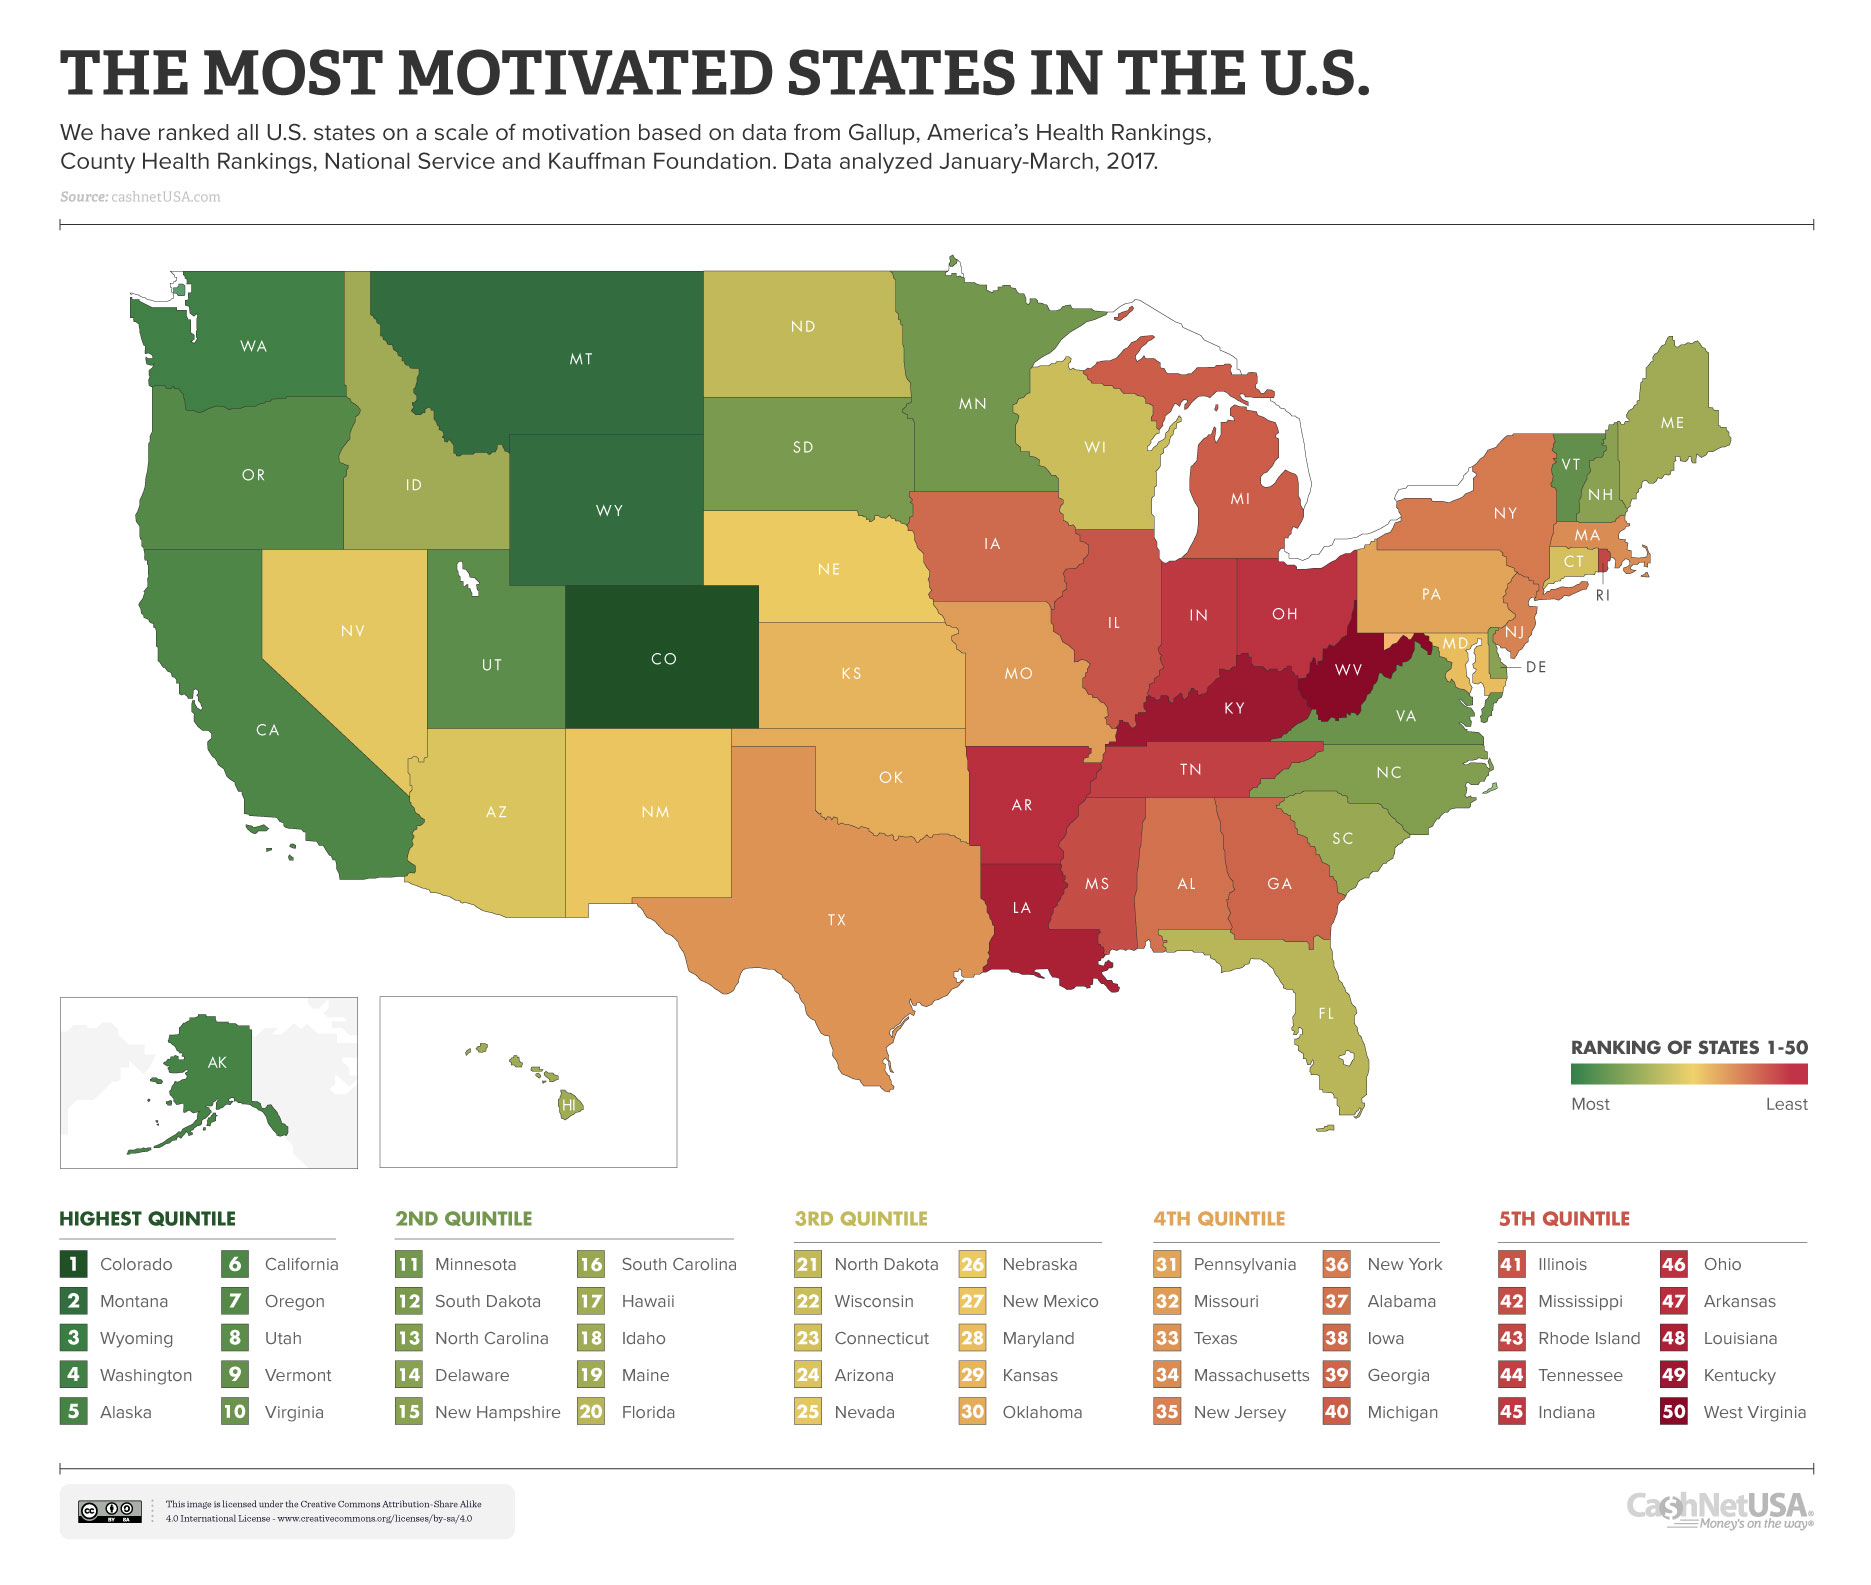 These Are the Most Motivated States in the U.S.